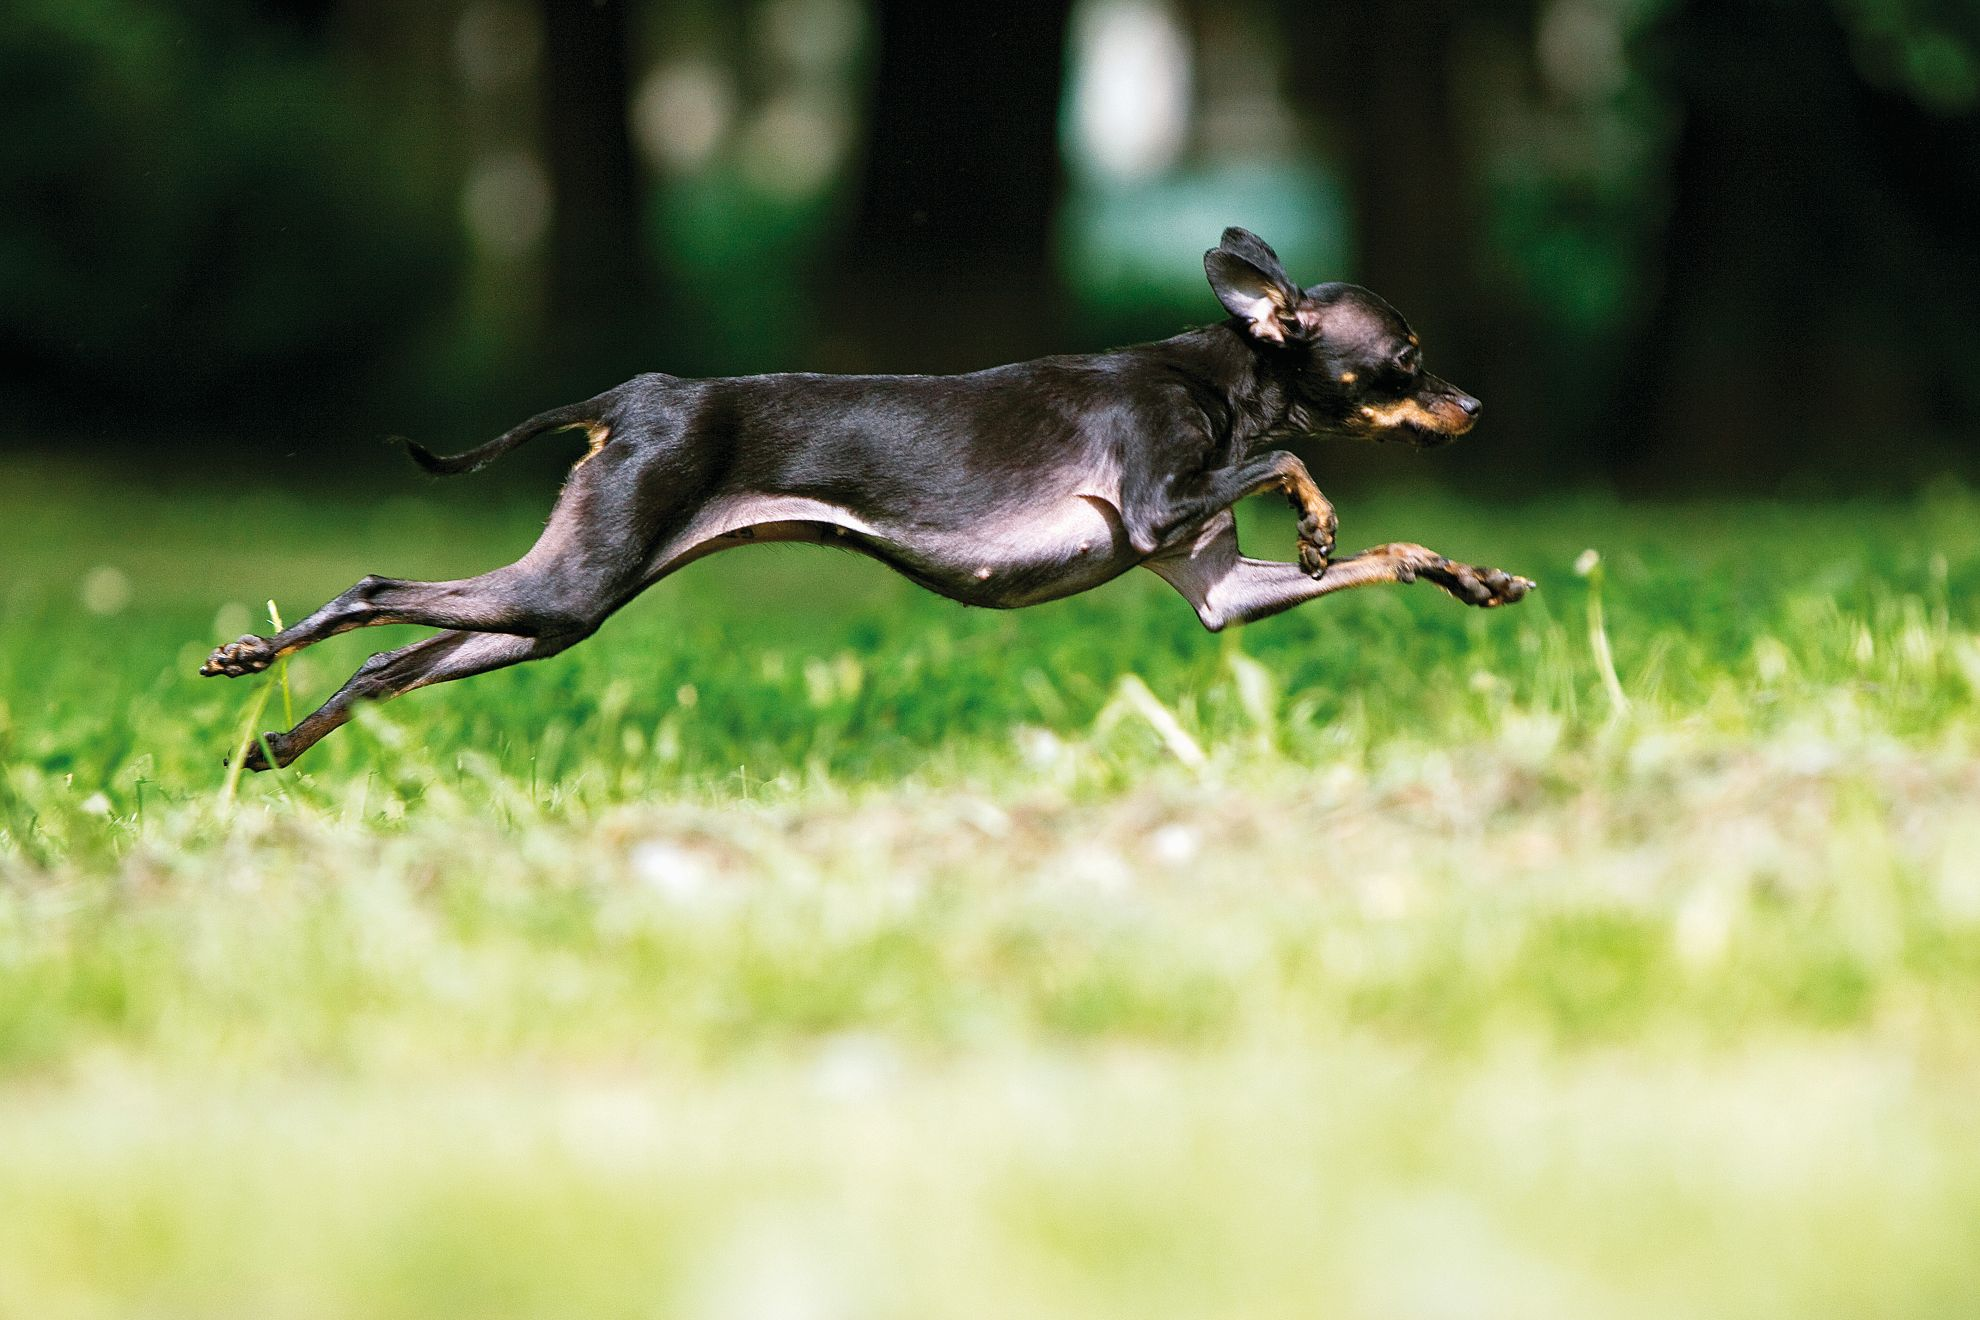 Black Russian Toy bounding over grass